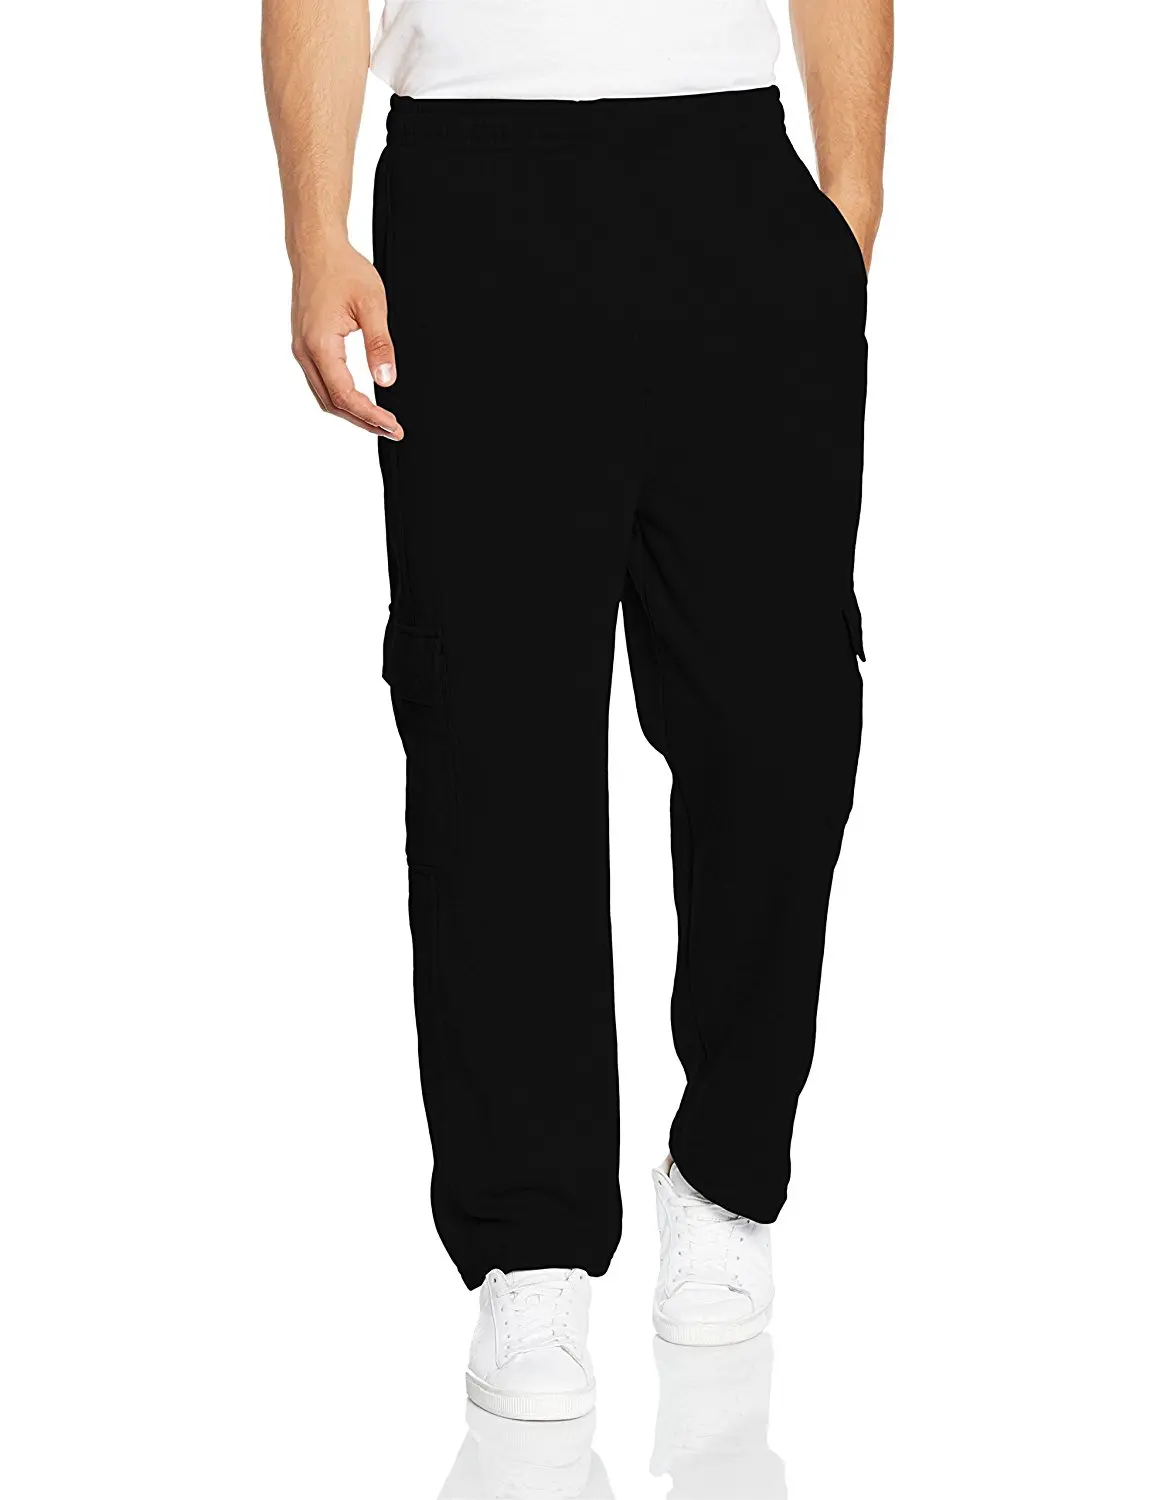 Cheap Cargo Sweatpants, find Cargo Sweatpants deals on line at Alibaba.com